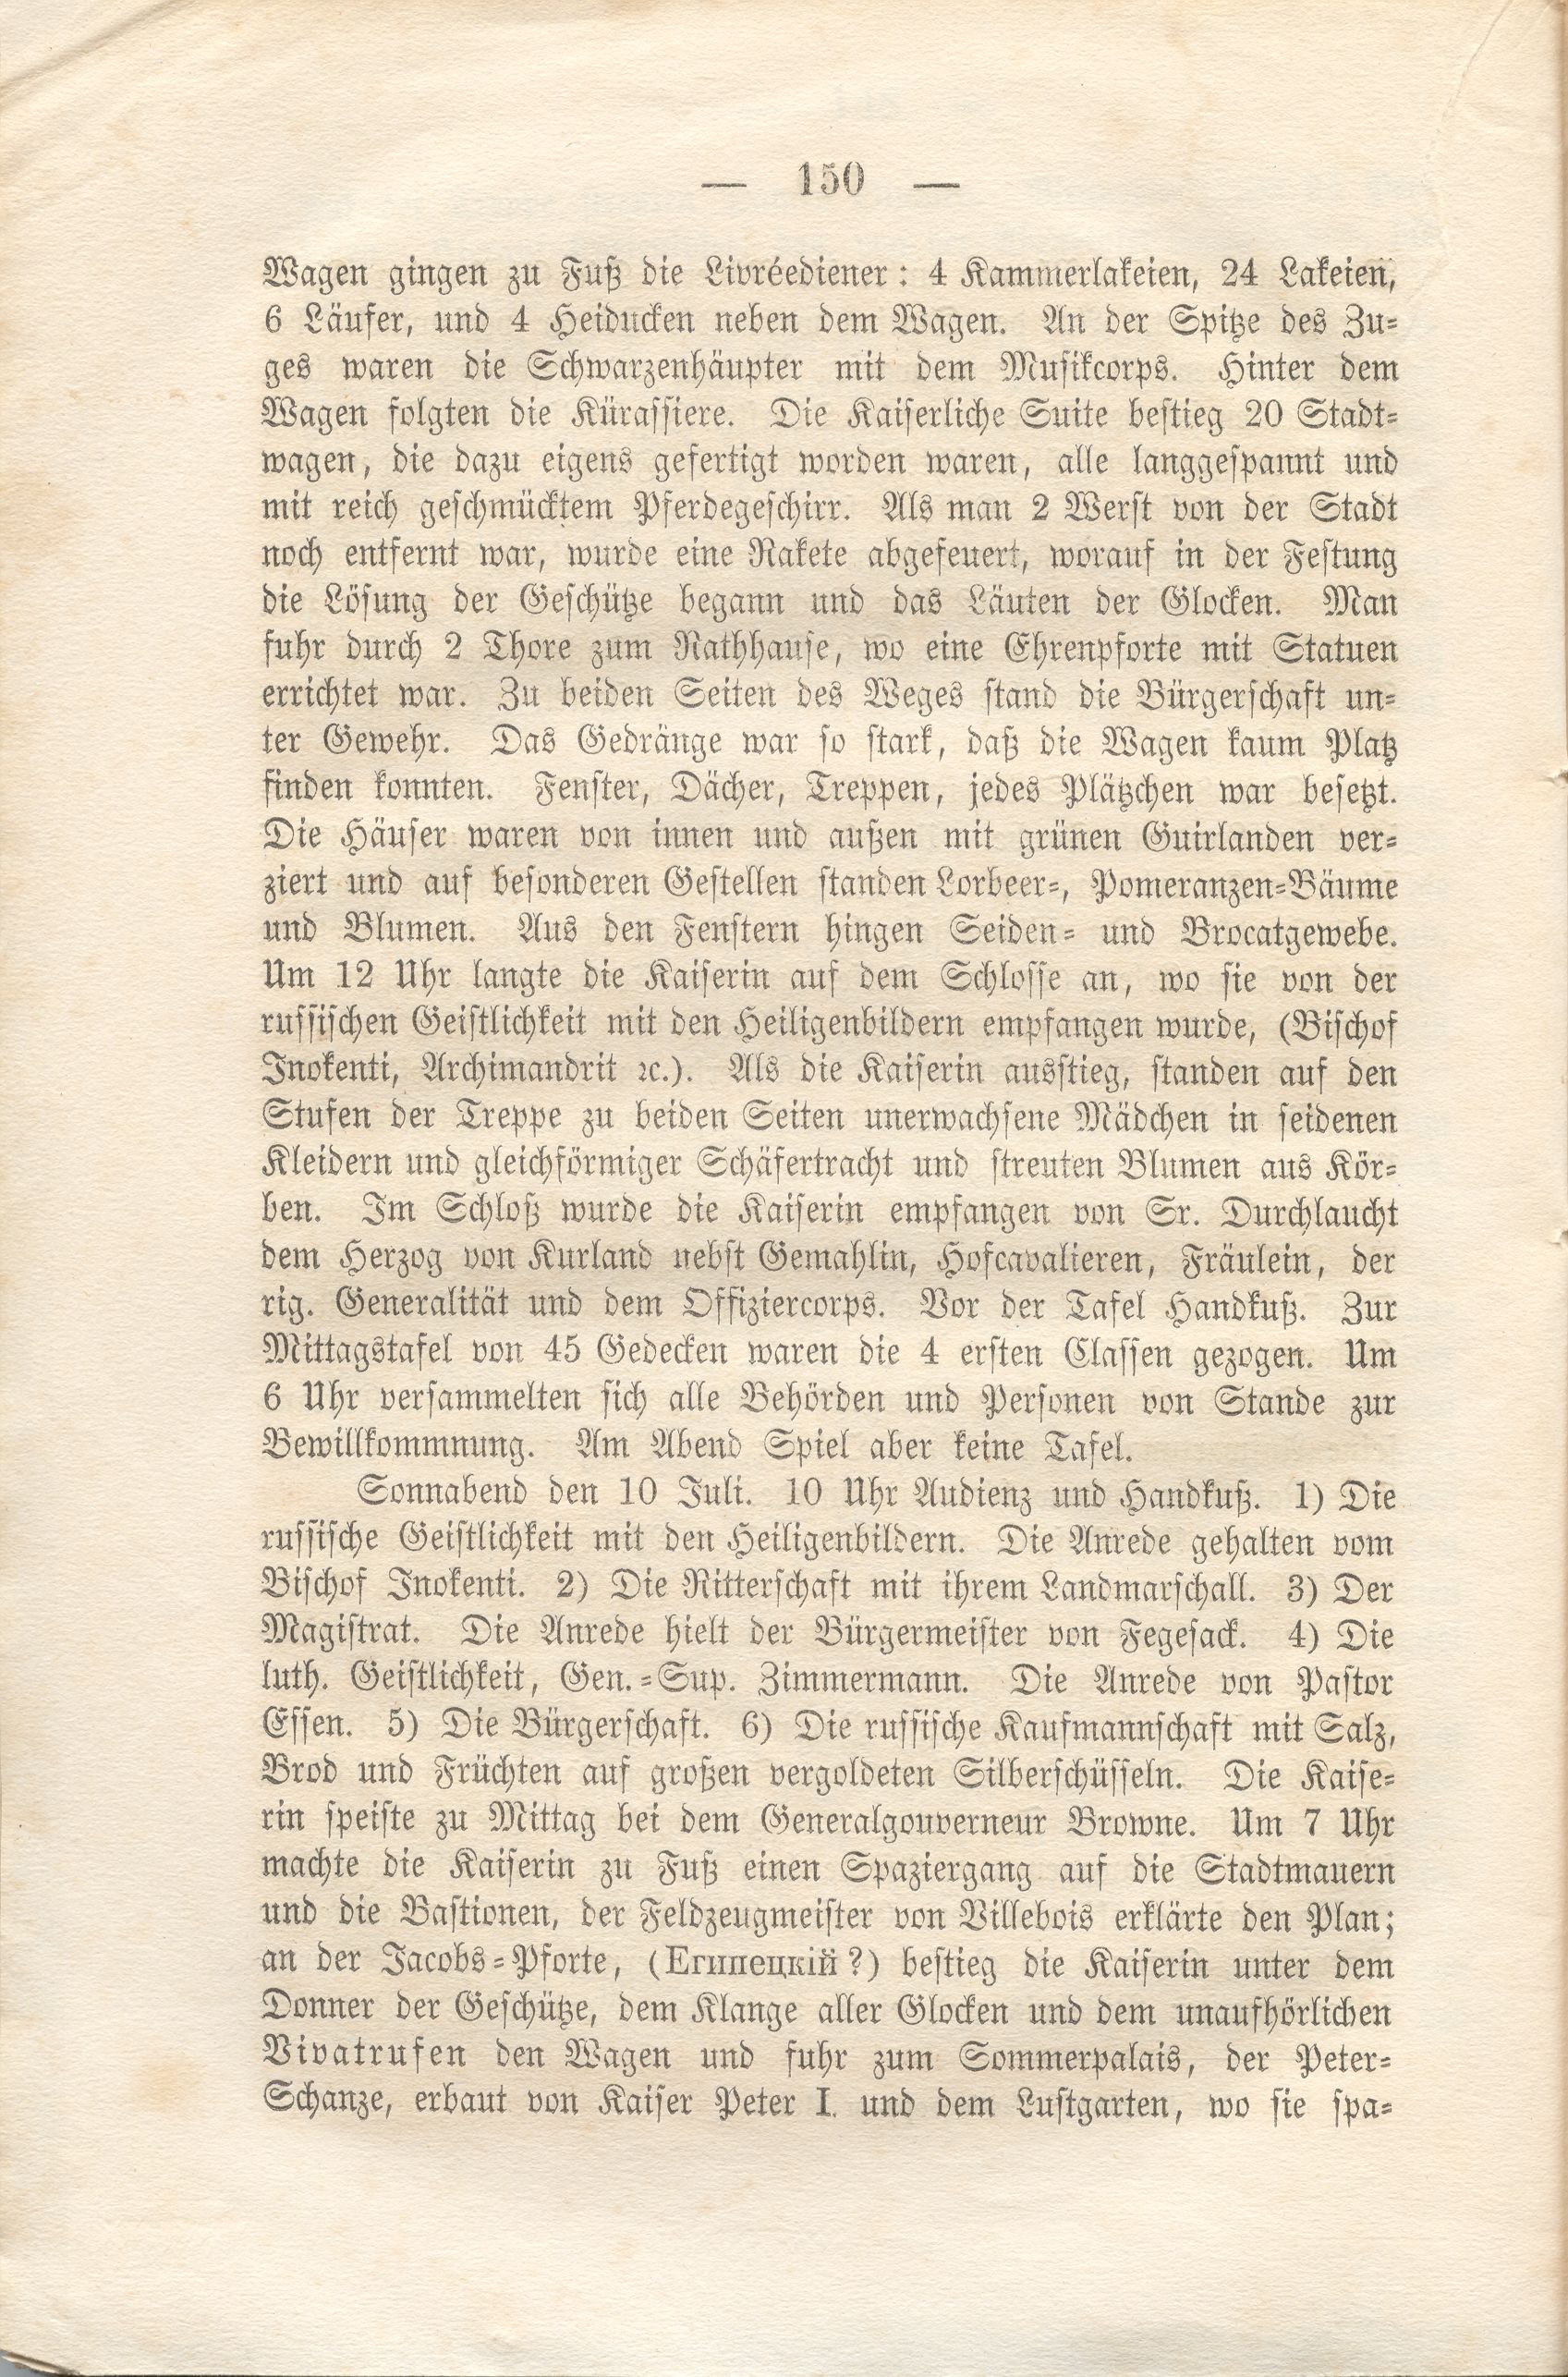 Wagien (1868) | 154. (150) Main body of text